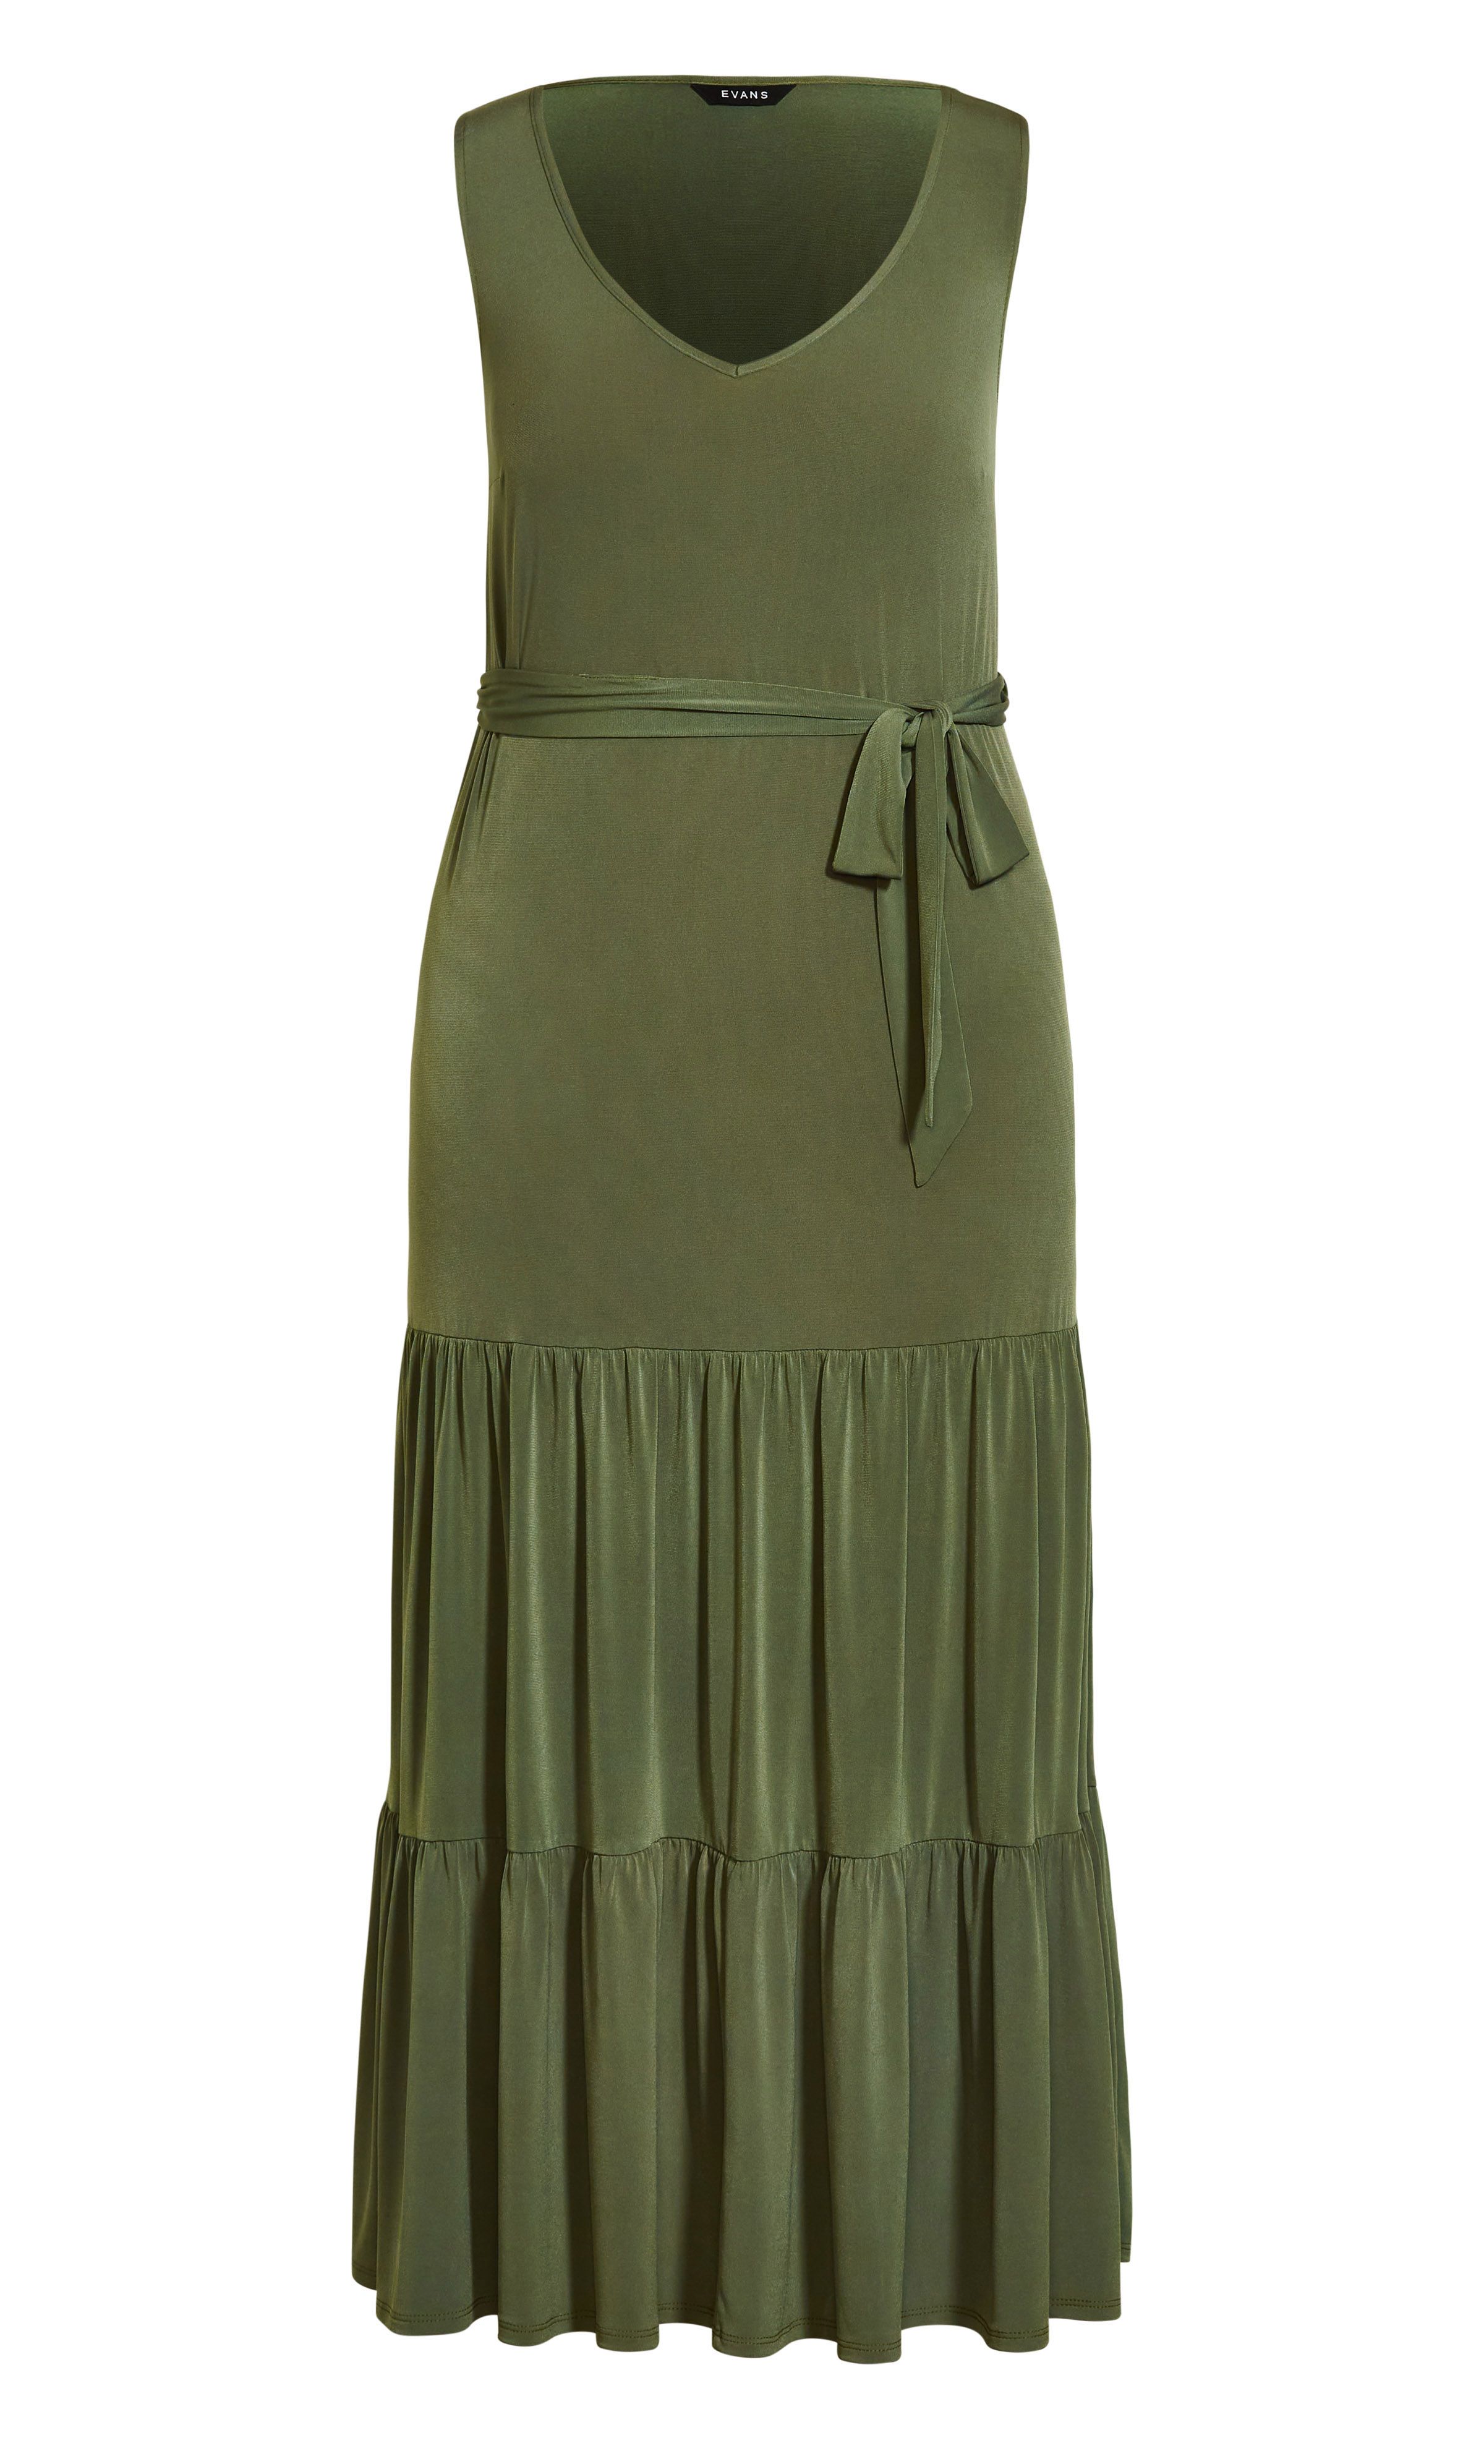 Boasting a trending khaki hue, the Tiered Sleeveless Maxi Dress is bound to become your summer go-to. It features a classic V-neckline and sleeveless cut, with a draping tiered hemline that floats ever so elegantly in motion. Key Features Include: - V-neckline - Sleeveless - Self-tie fabric waist belt - Pull over style - Relaxed fit - Unlined - Maxi length - Ruffle tiered hemline Tie up your look with tan-hued sandals, a pair of cat-eye sunglasses and a chic rattan bag. Summery perfection!